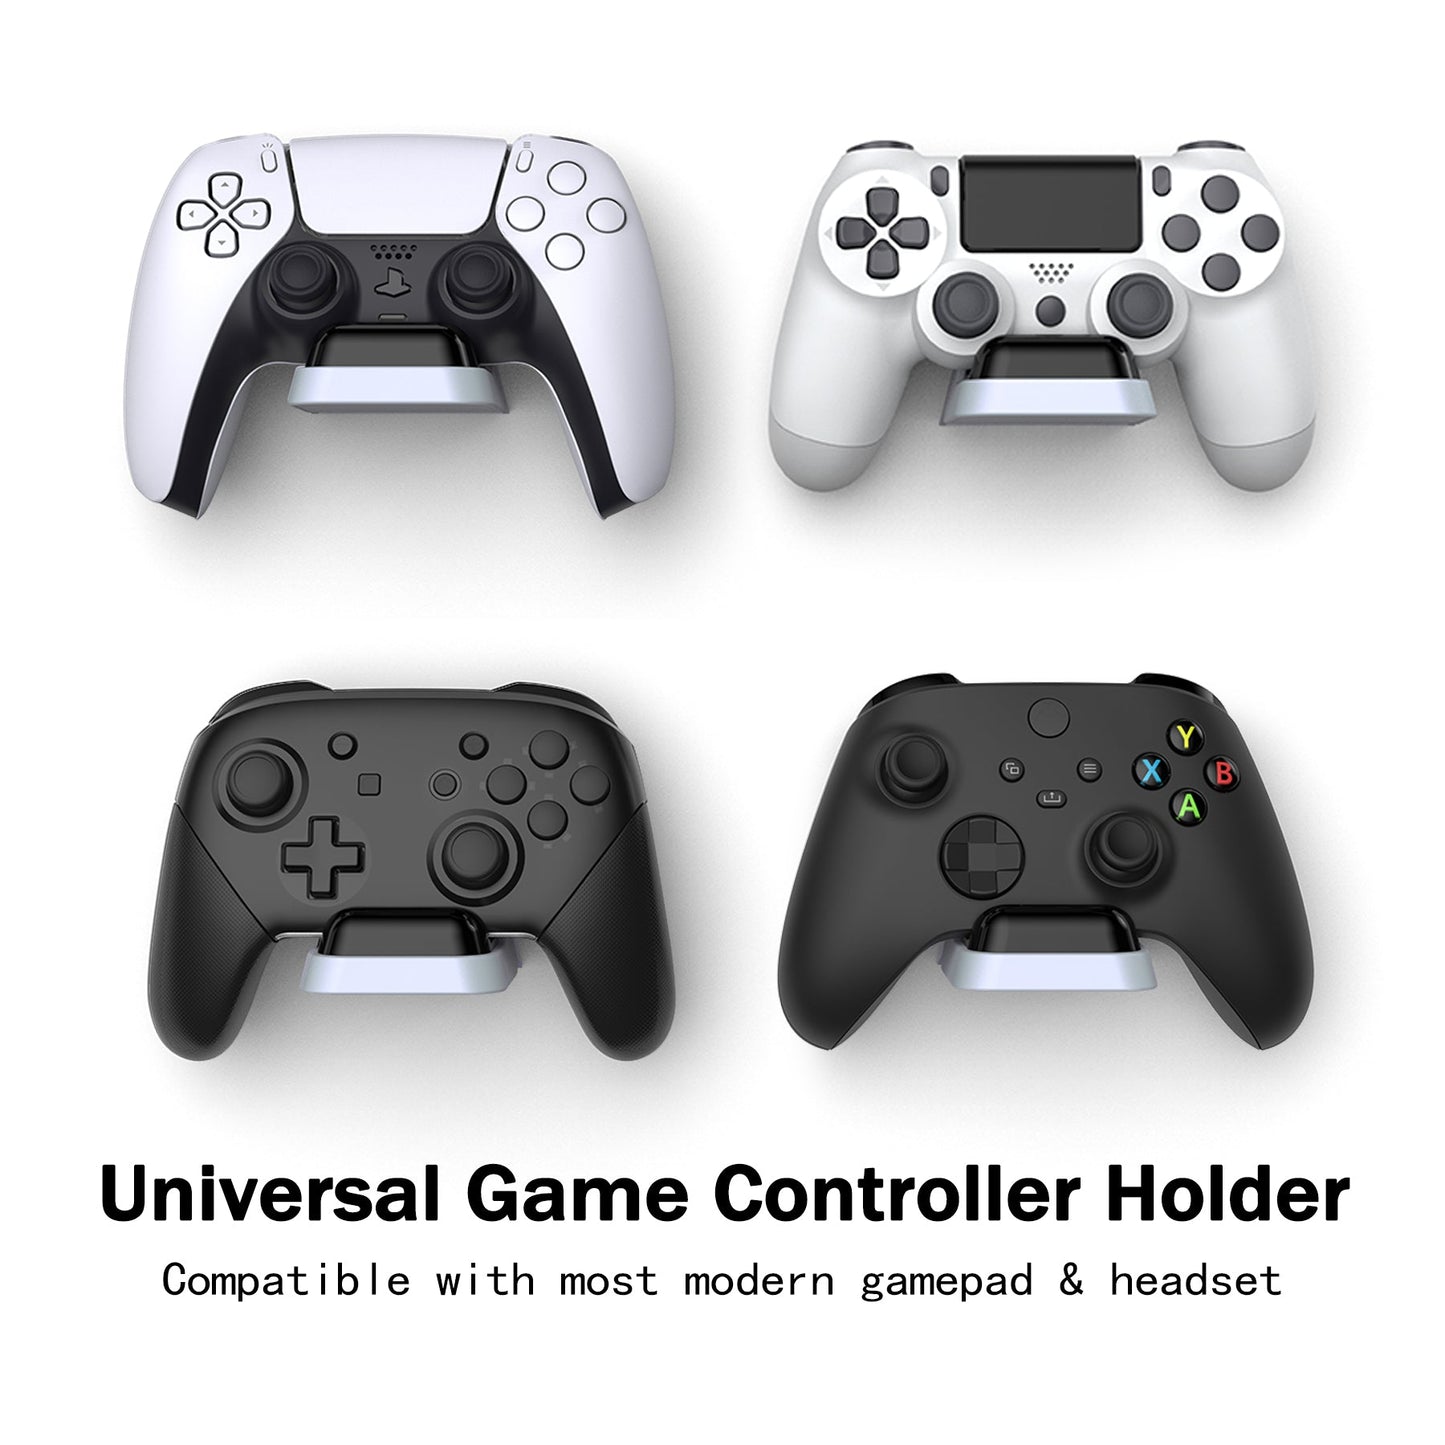 PlayVital Universal Game Controller Wall Mount for ps5 & Headset, Wall Stand for Xbox Series Controller, Wall Holder for Nintendo Switch Pro Controller, Dedicated Console Hanger Mode for ps5 - Black & White - PFPJ069 PlayVital